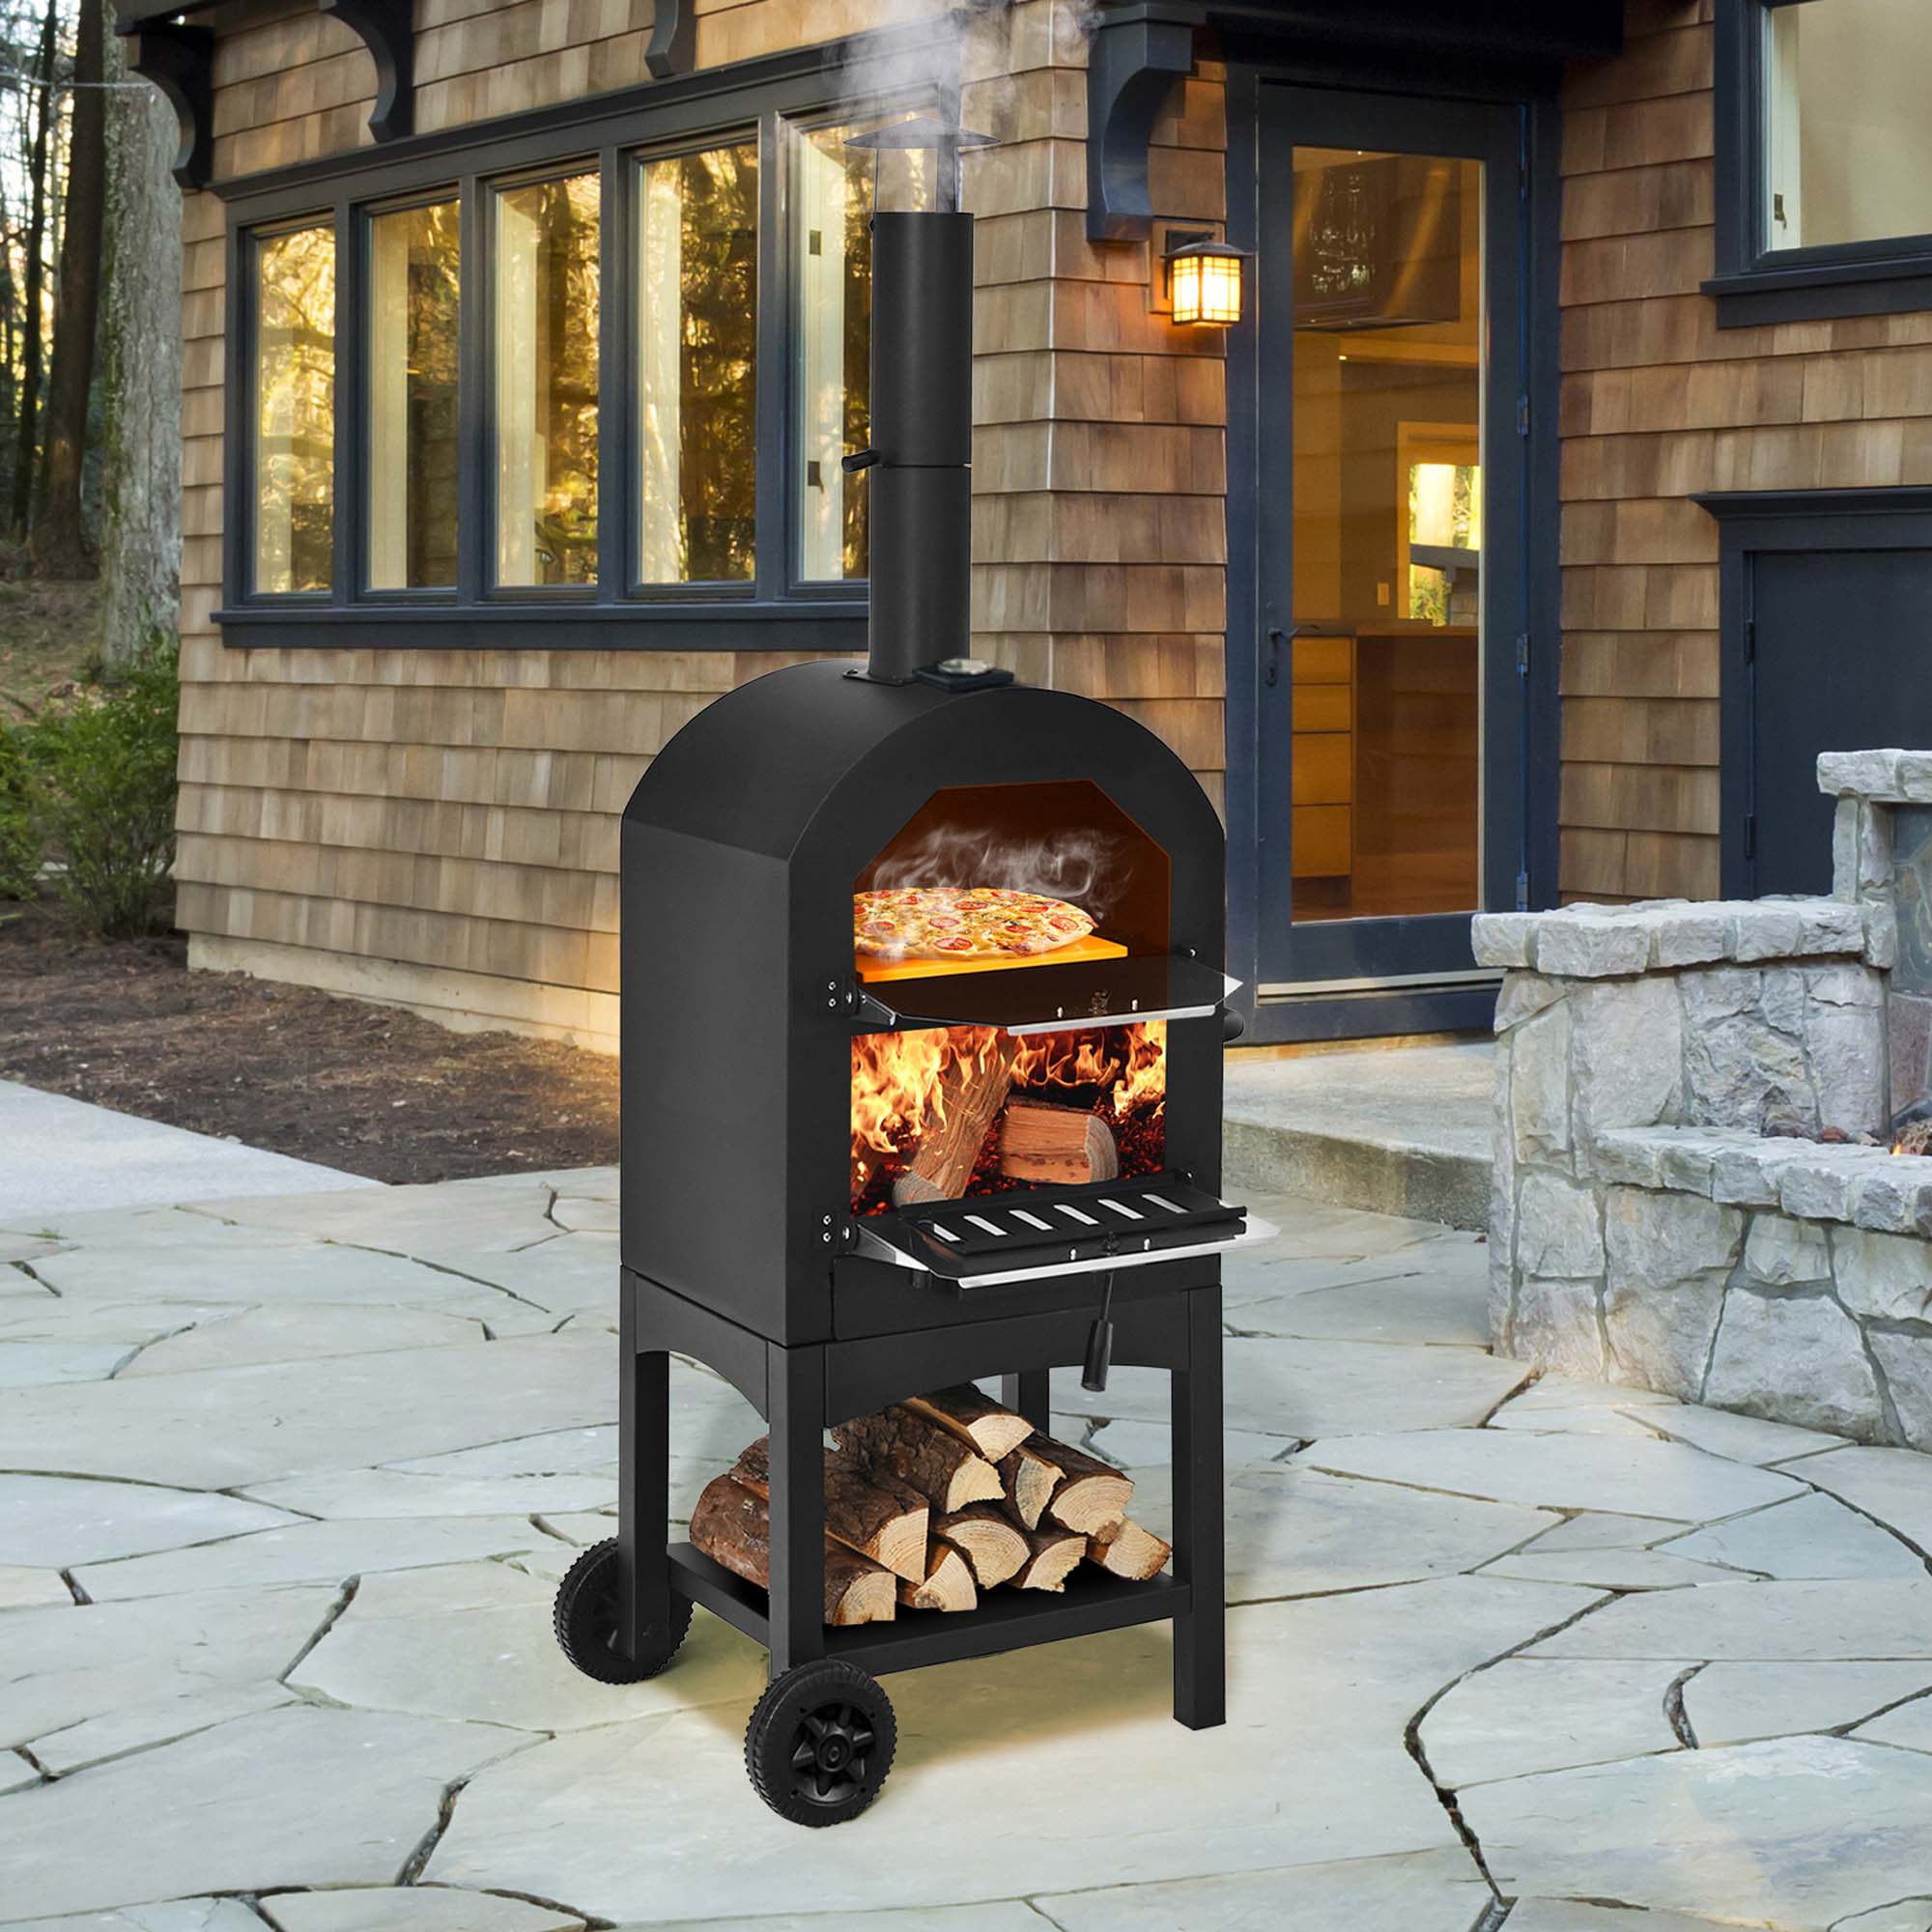 Costway Outdoor Pizza Oven Wood Fire Pizza Maker Grill w/ Pizza Stone & Waterproof Cover - image 2 of 10